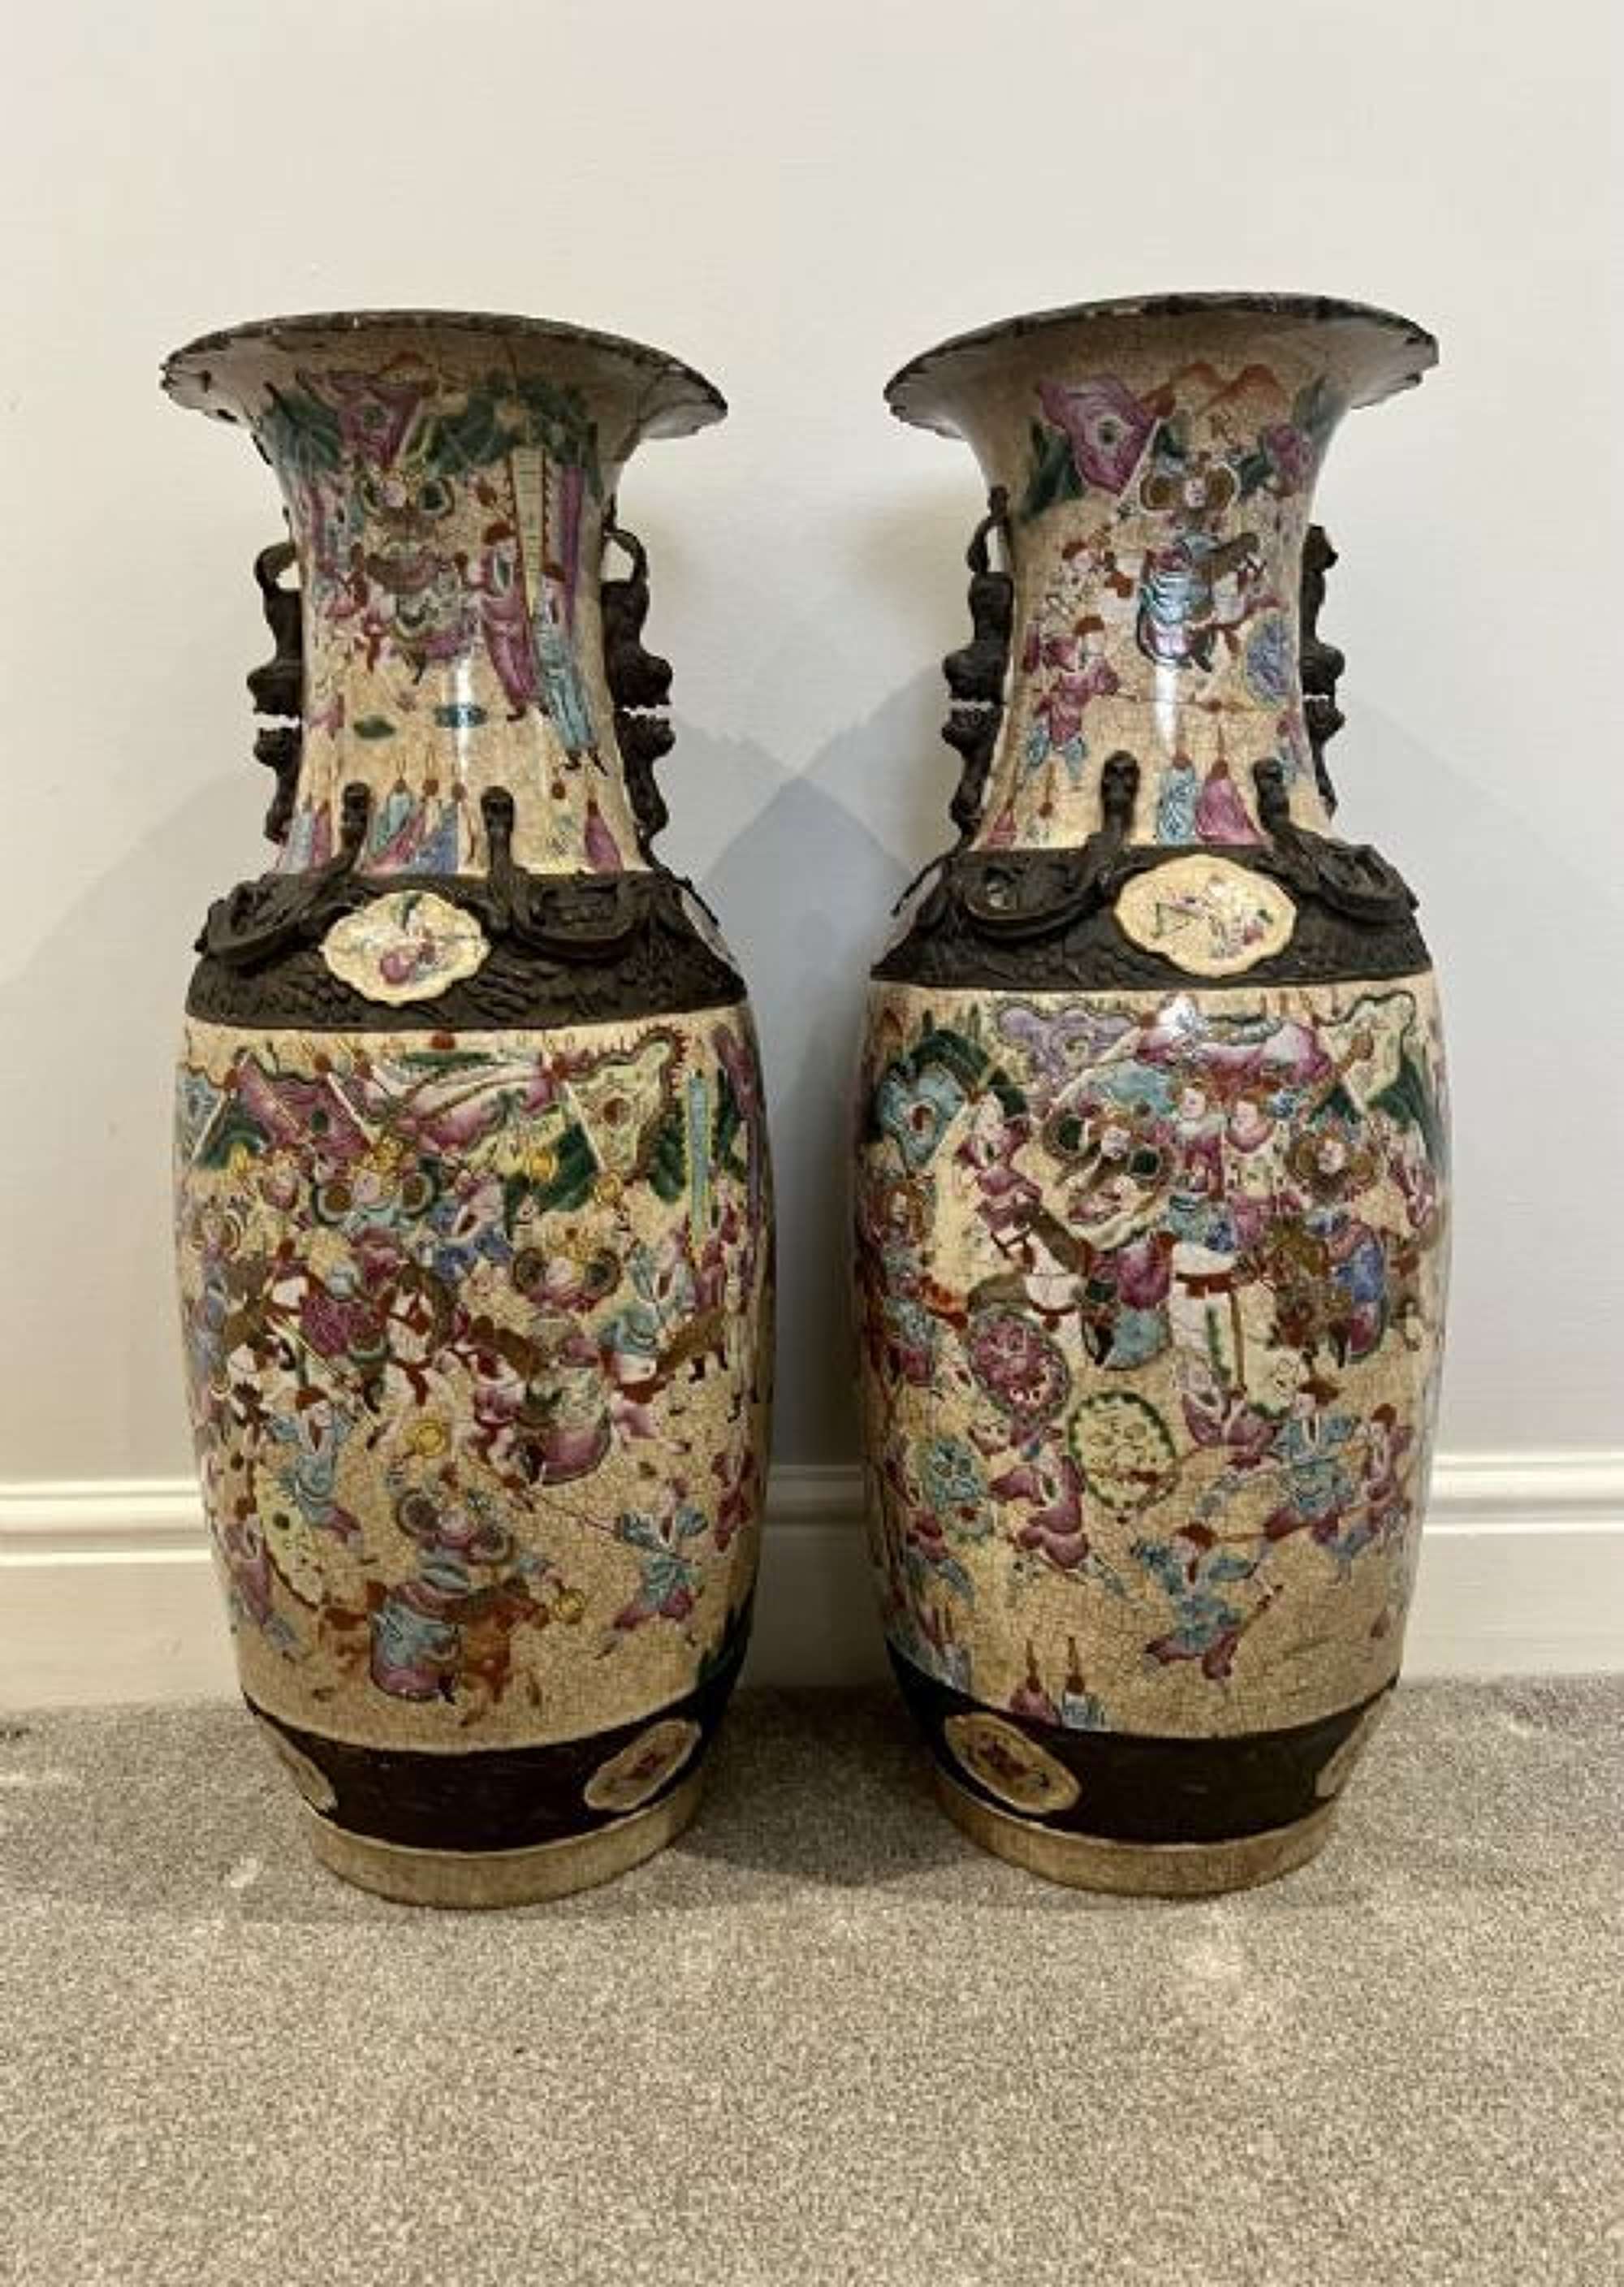 Large Pair Of Antique Chinese Crackled Glazed Vases